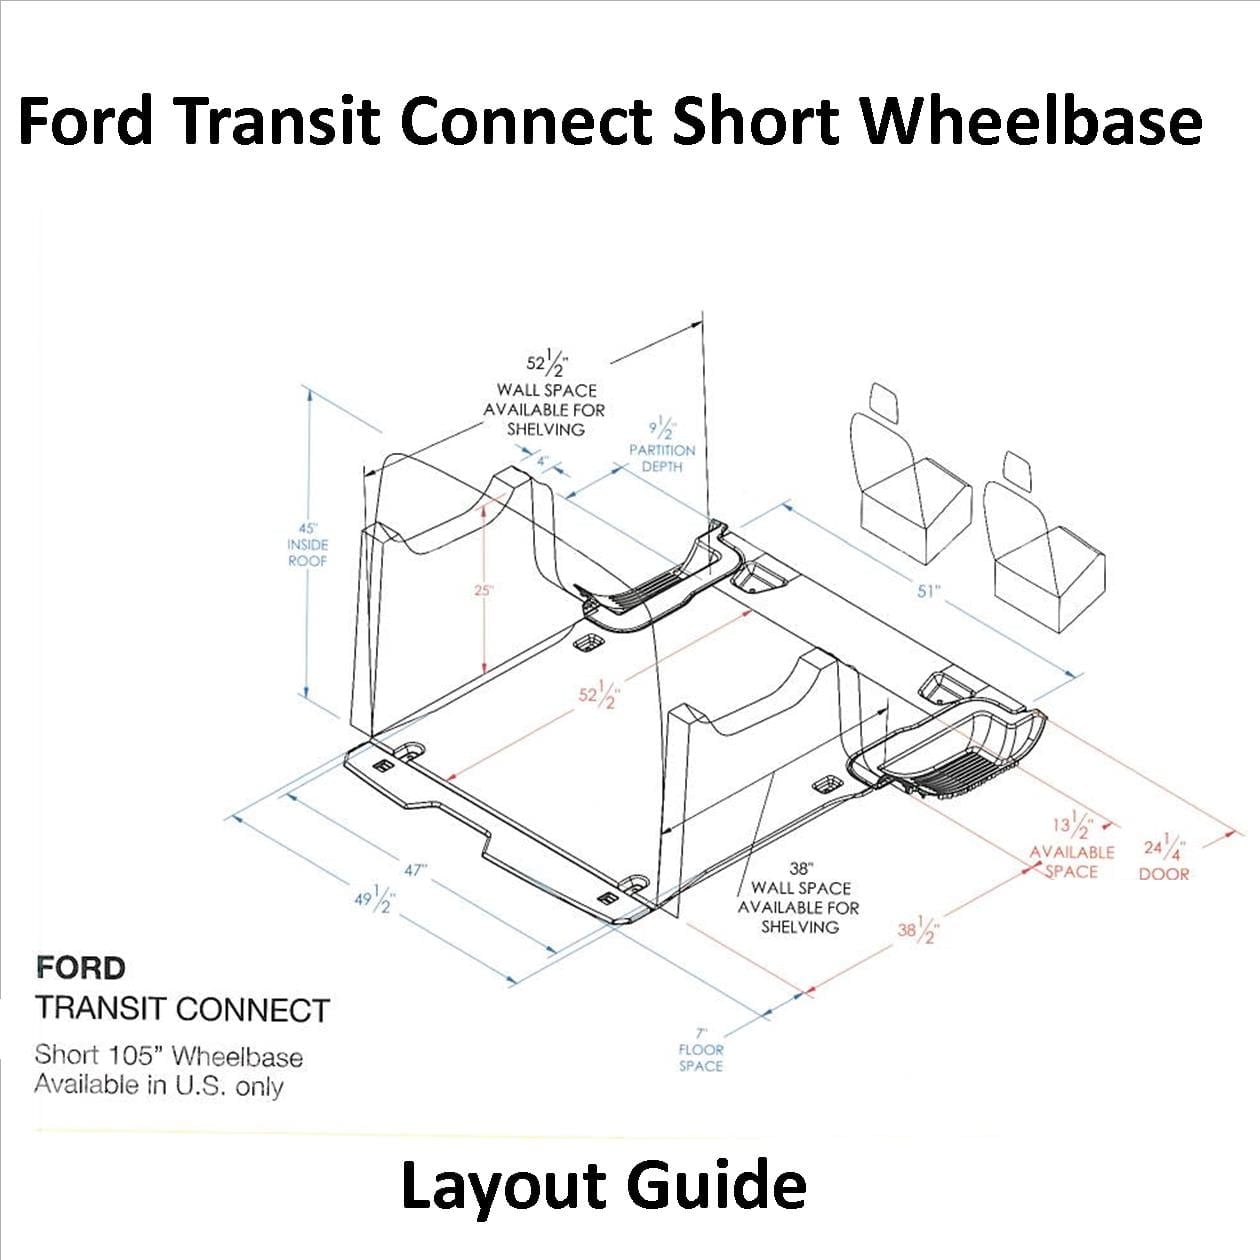 Ford Transit Connect Layout Guide Short